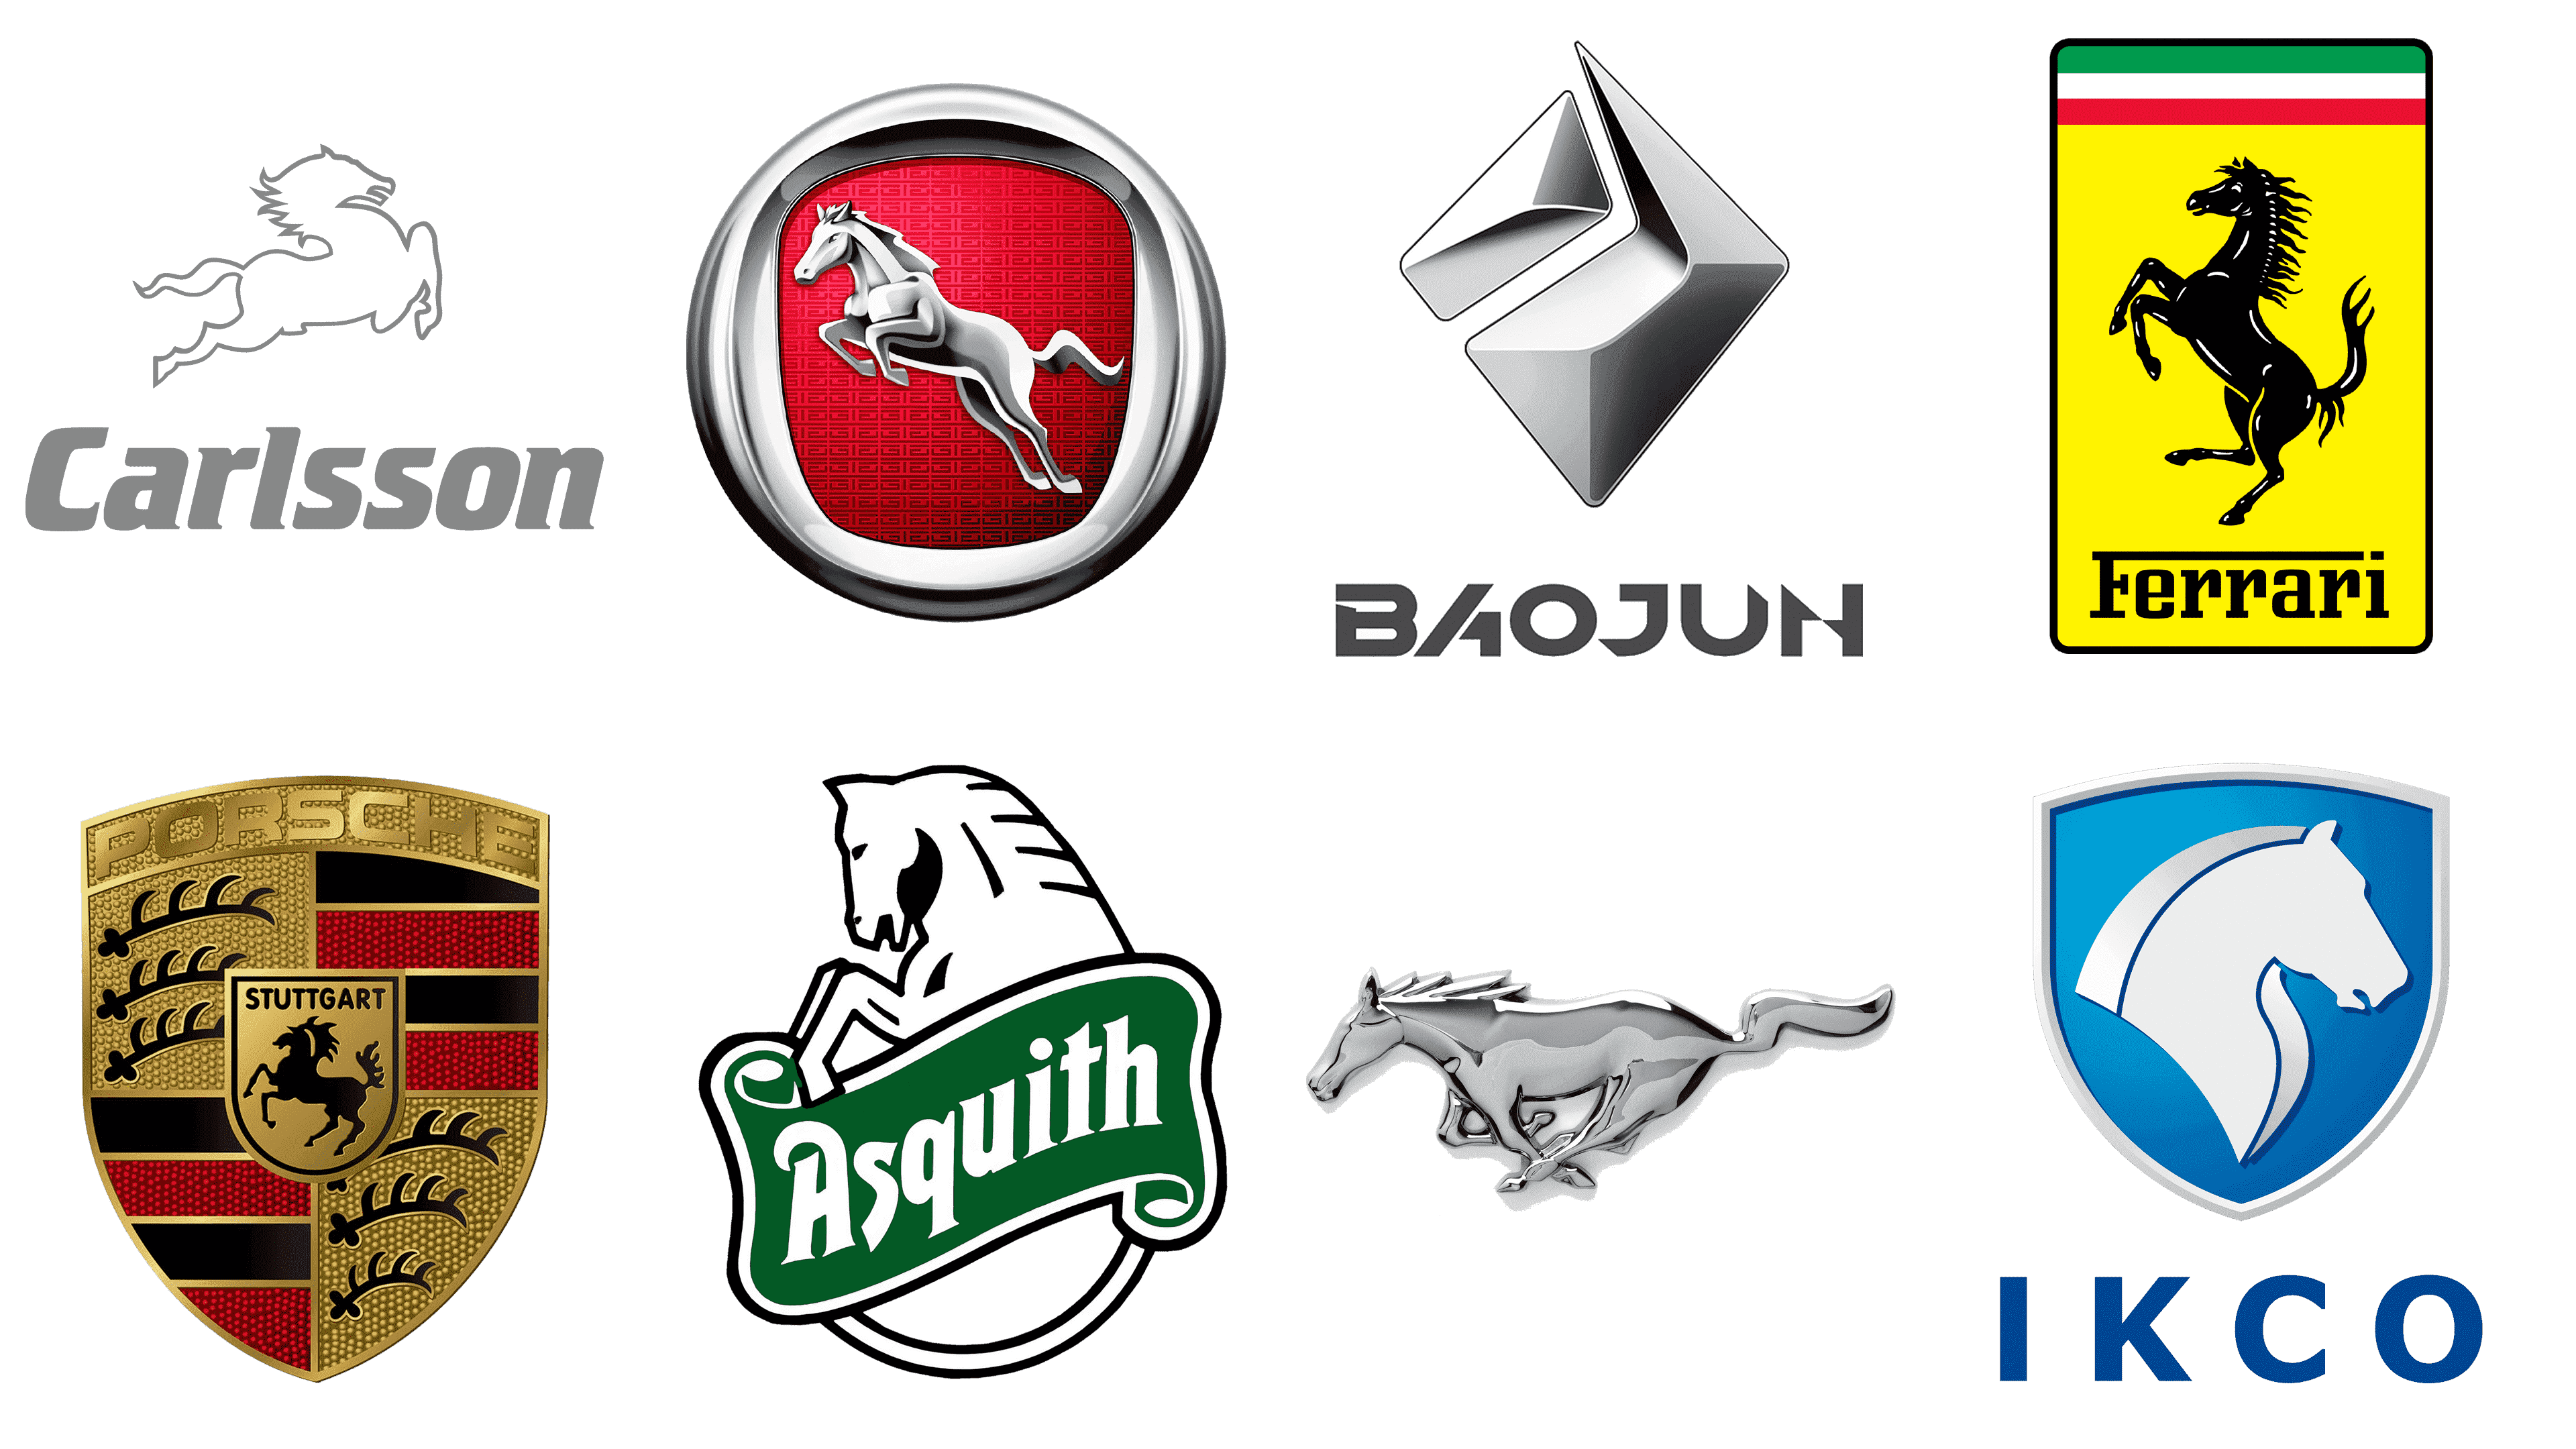 Foreign Car Logos With Names